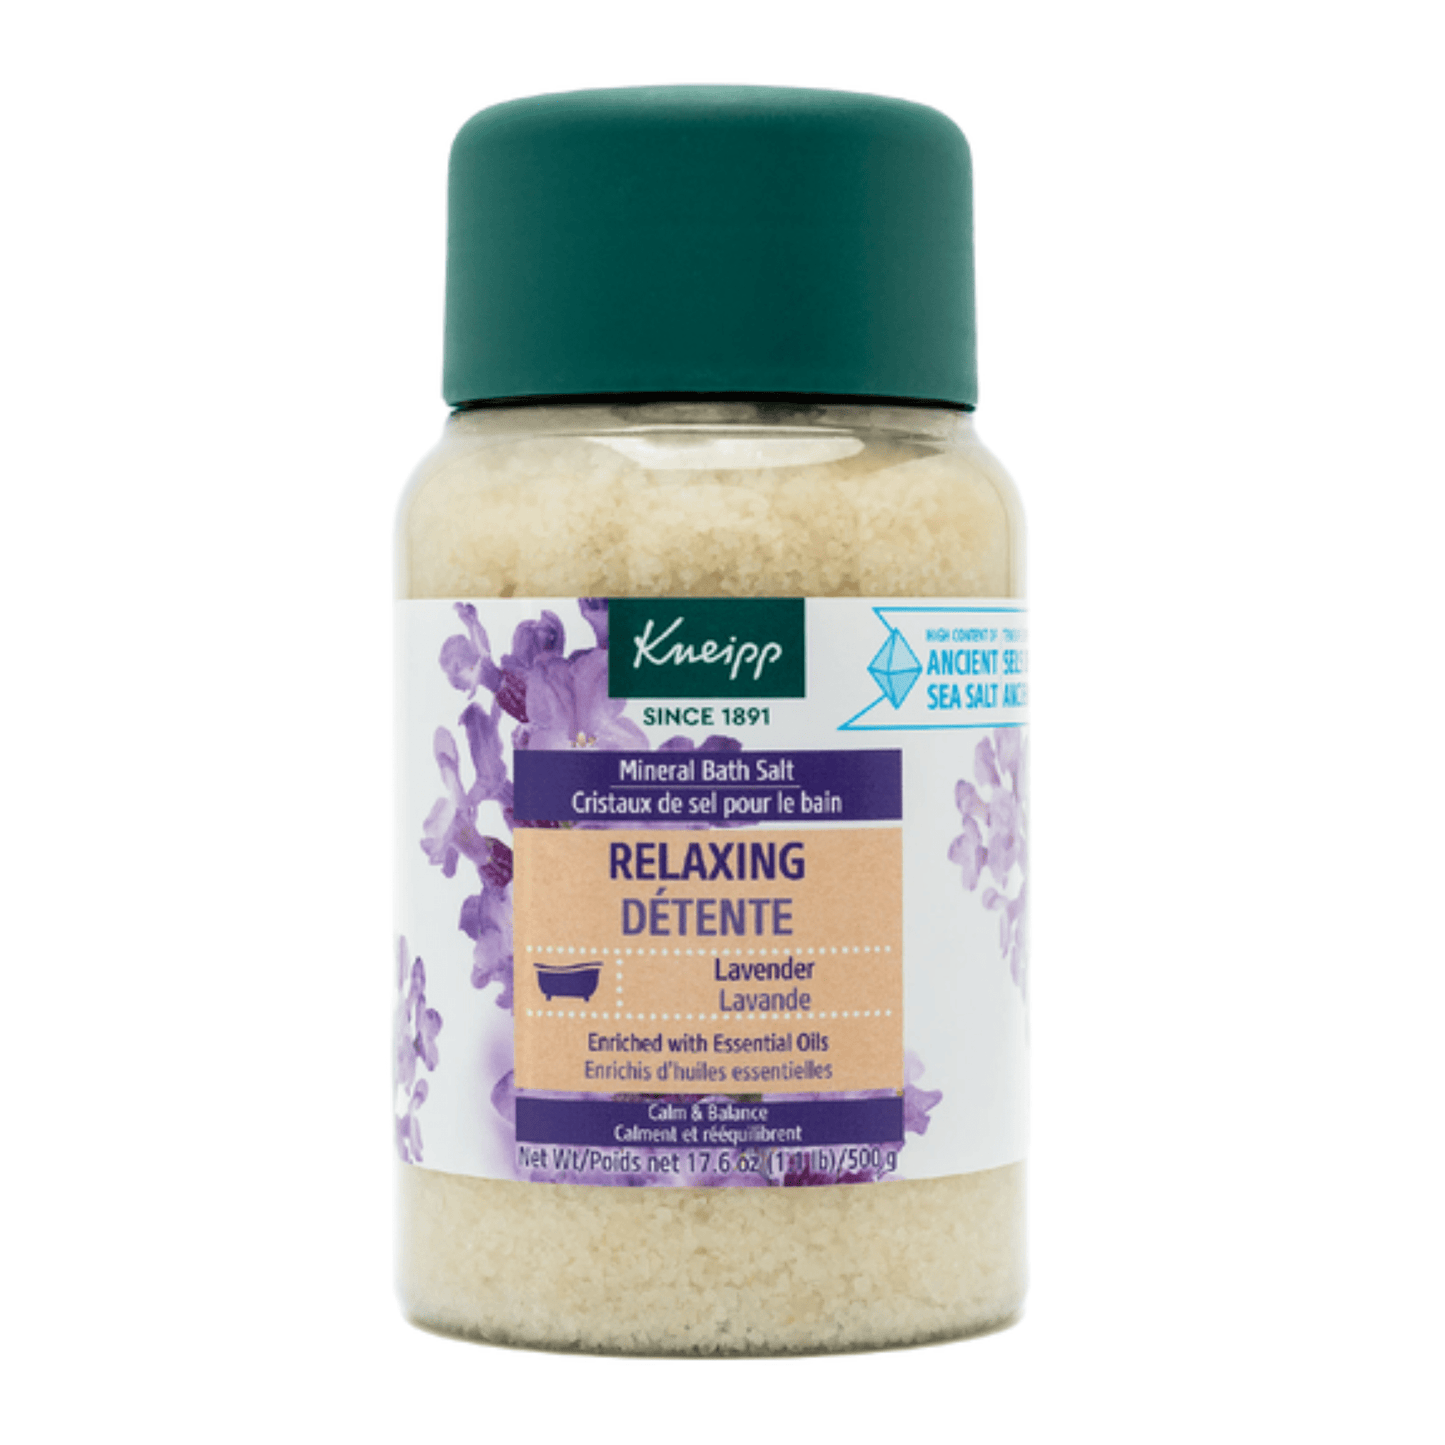 Primary Image of Lavender Relaxing Mineral Bath Salts